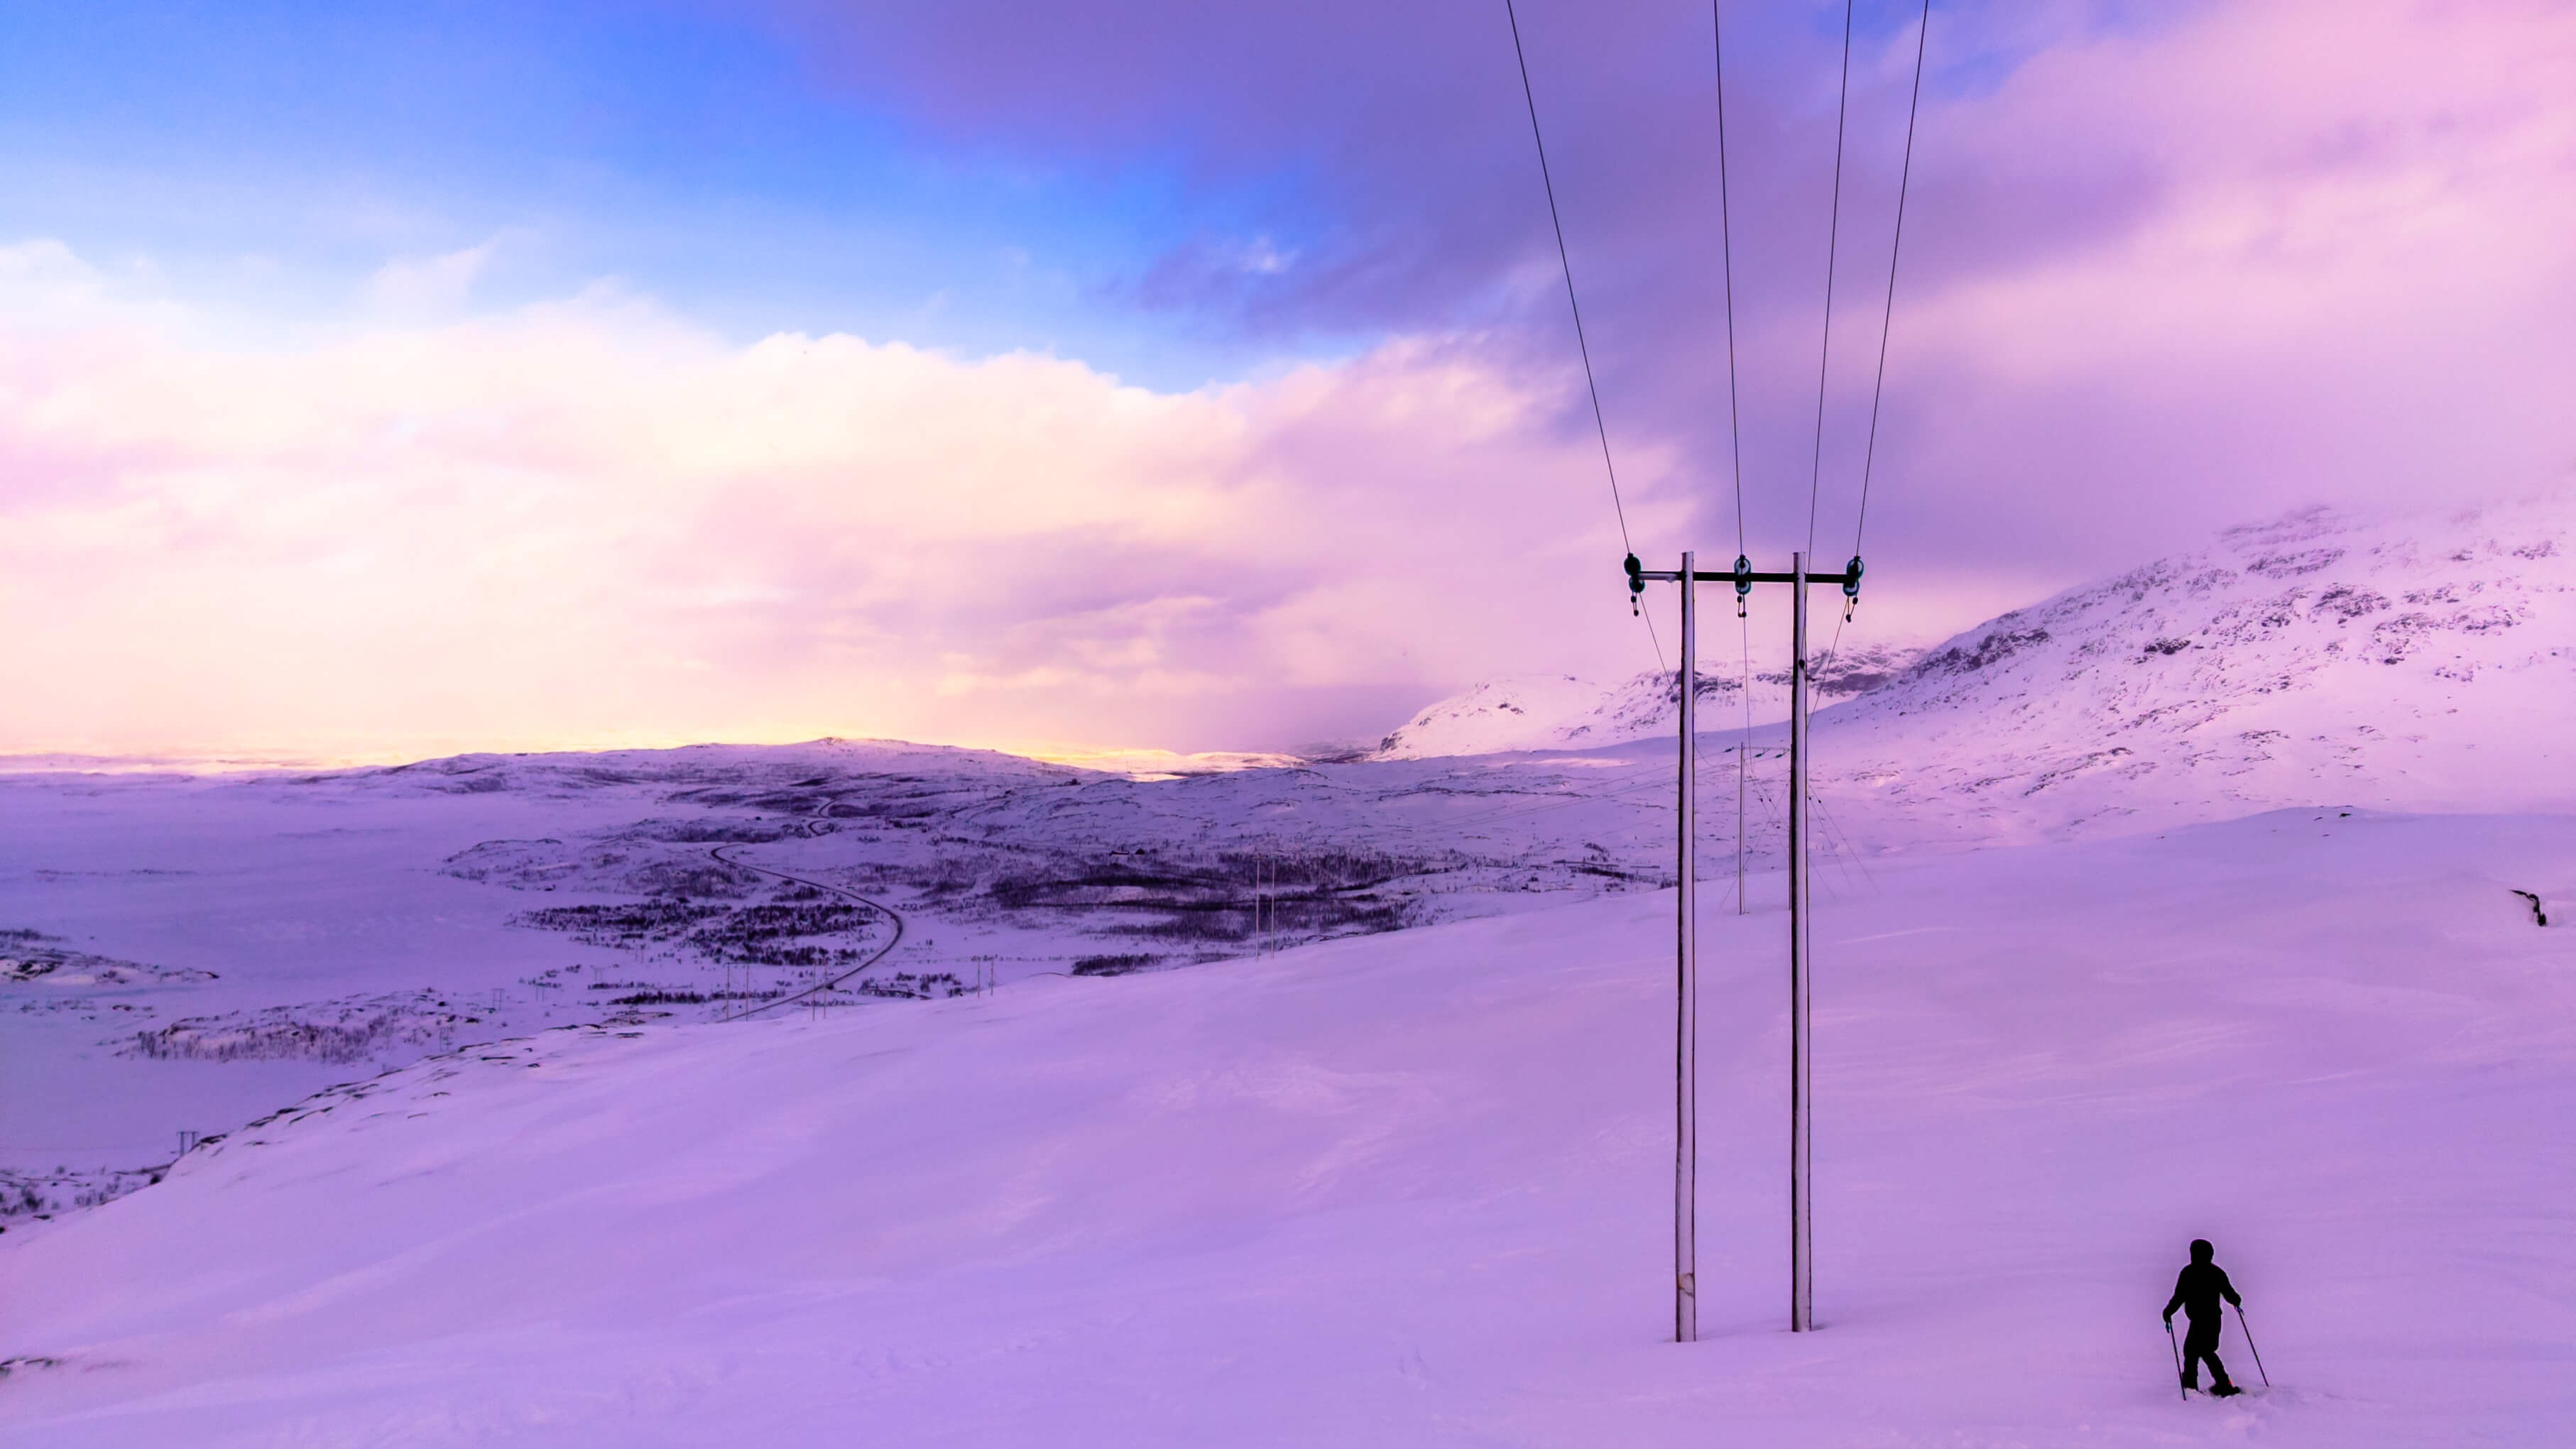 Photo from the top of a snowy mountain with a person skiing towards a powerline, with a road in the background